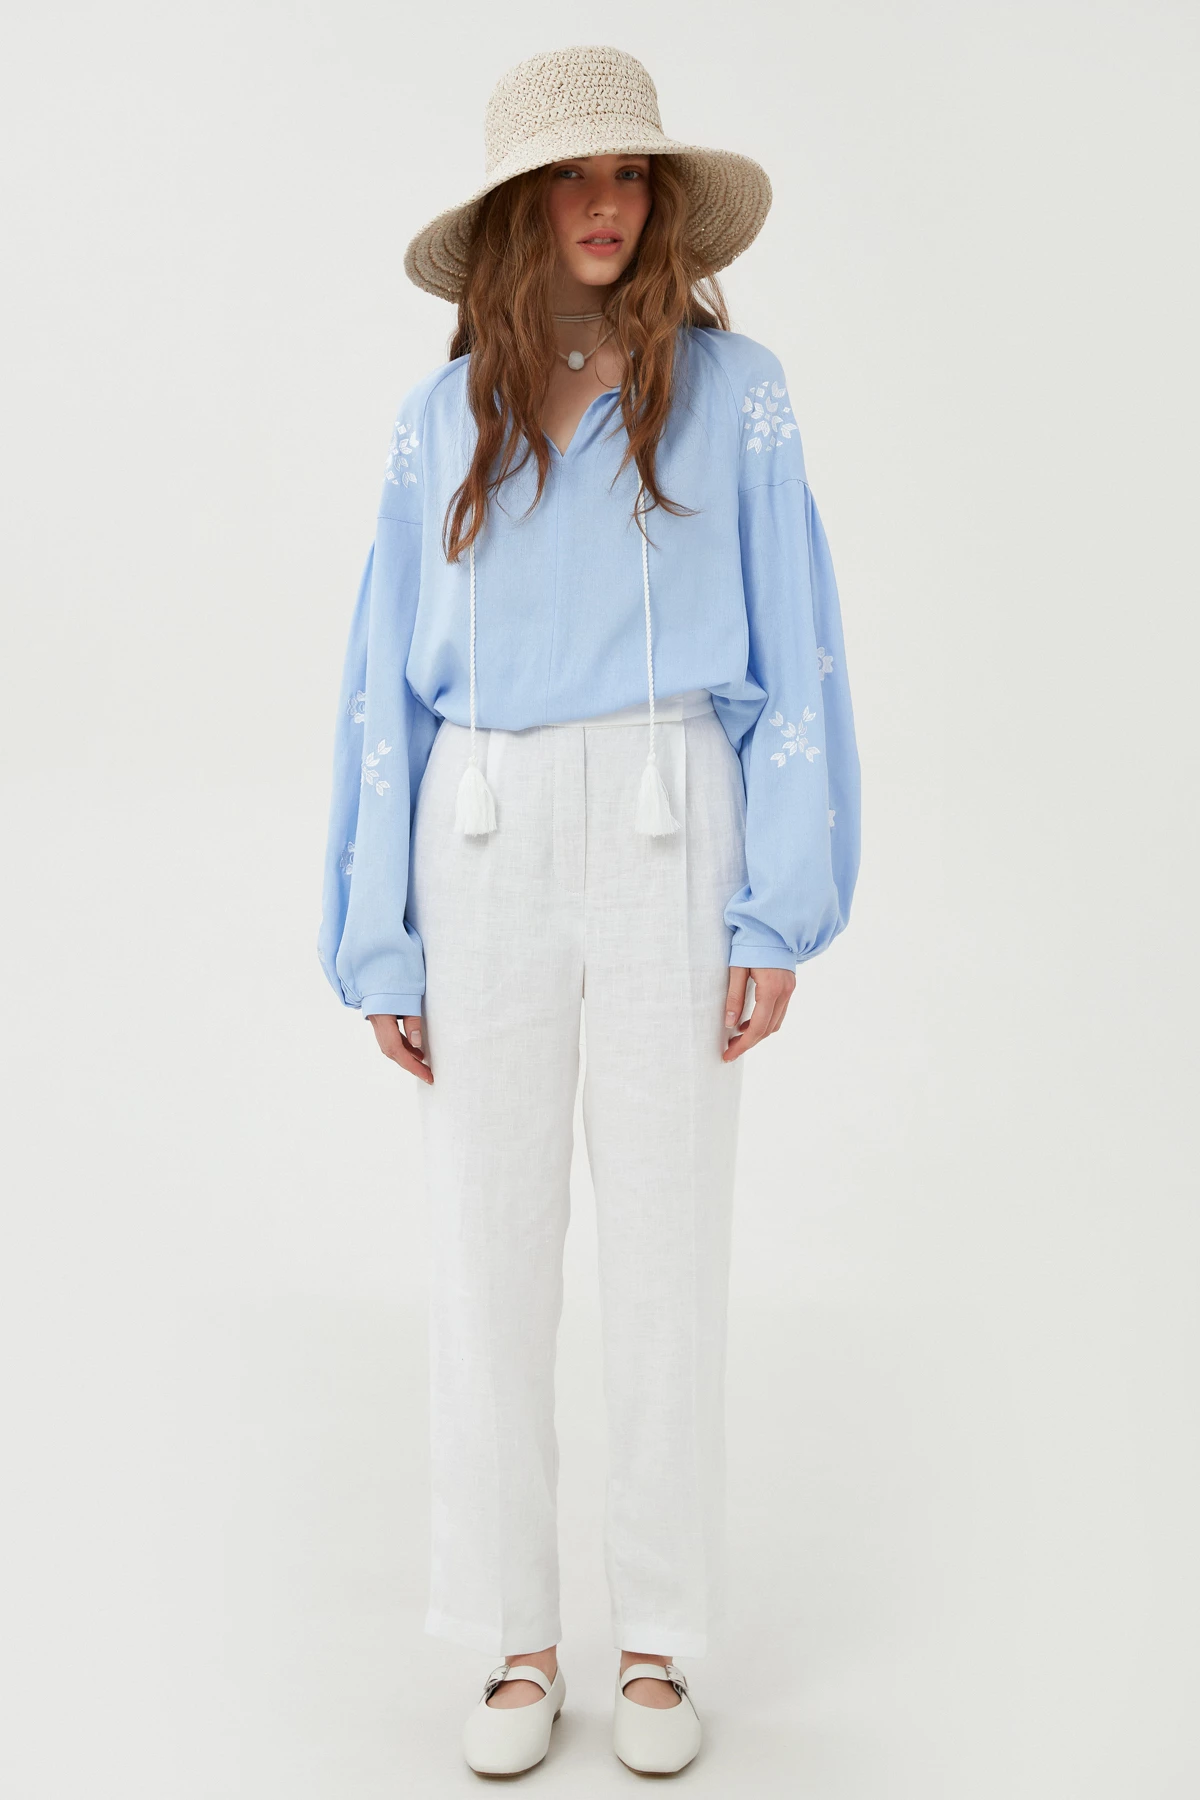 Embroidered shirt "Malvy" with blue linen, photo 5